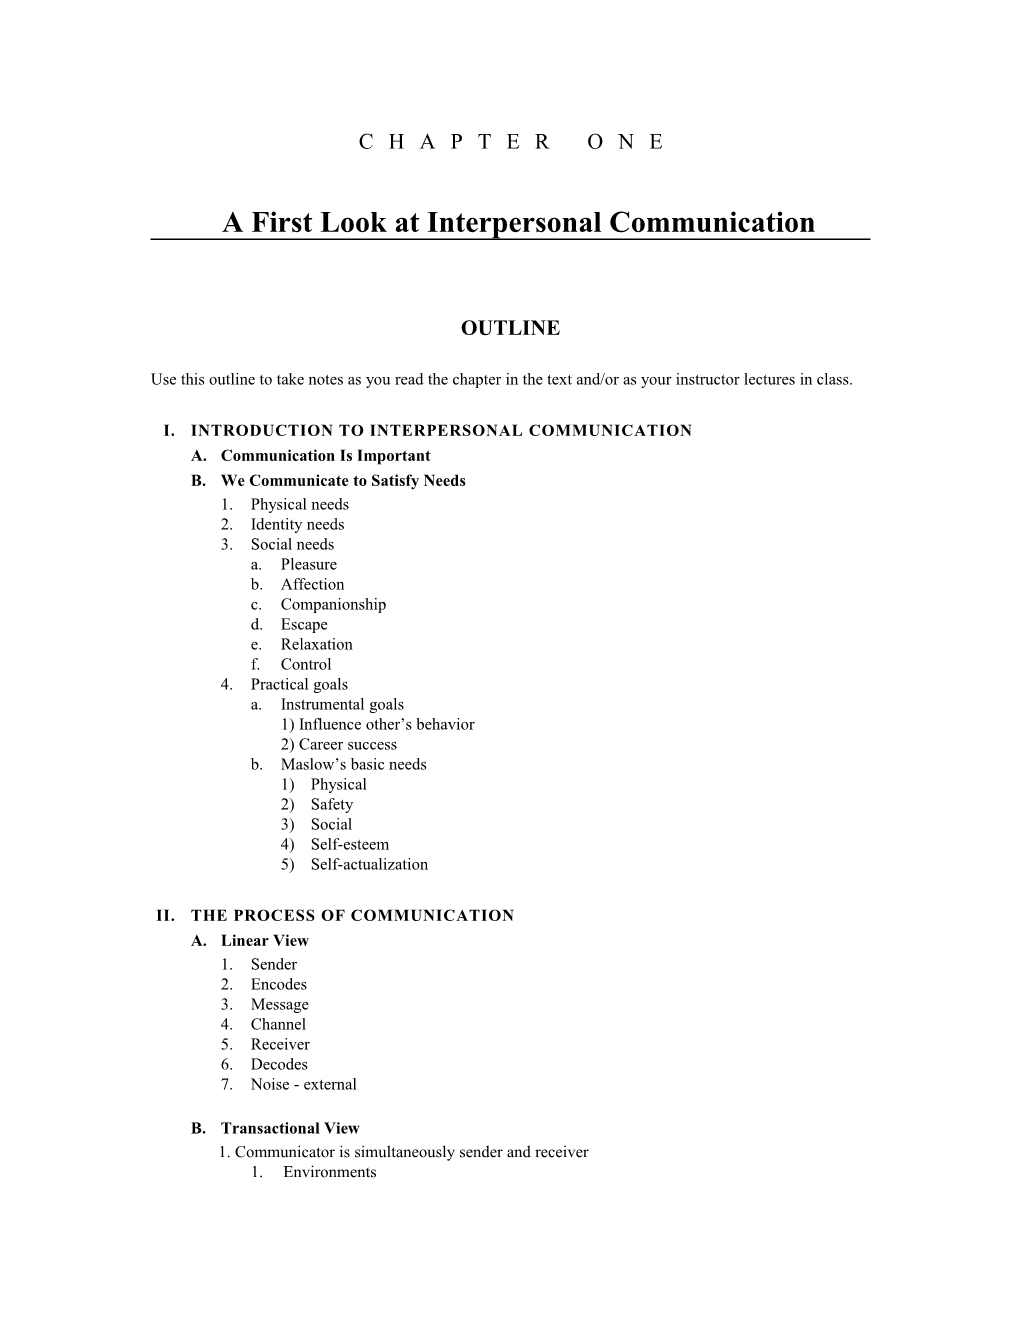 A First Lookat Interpersonal Communication